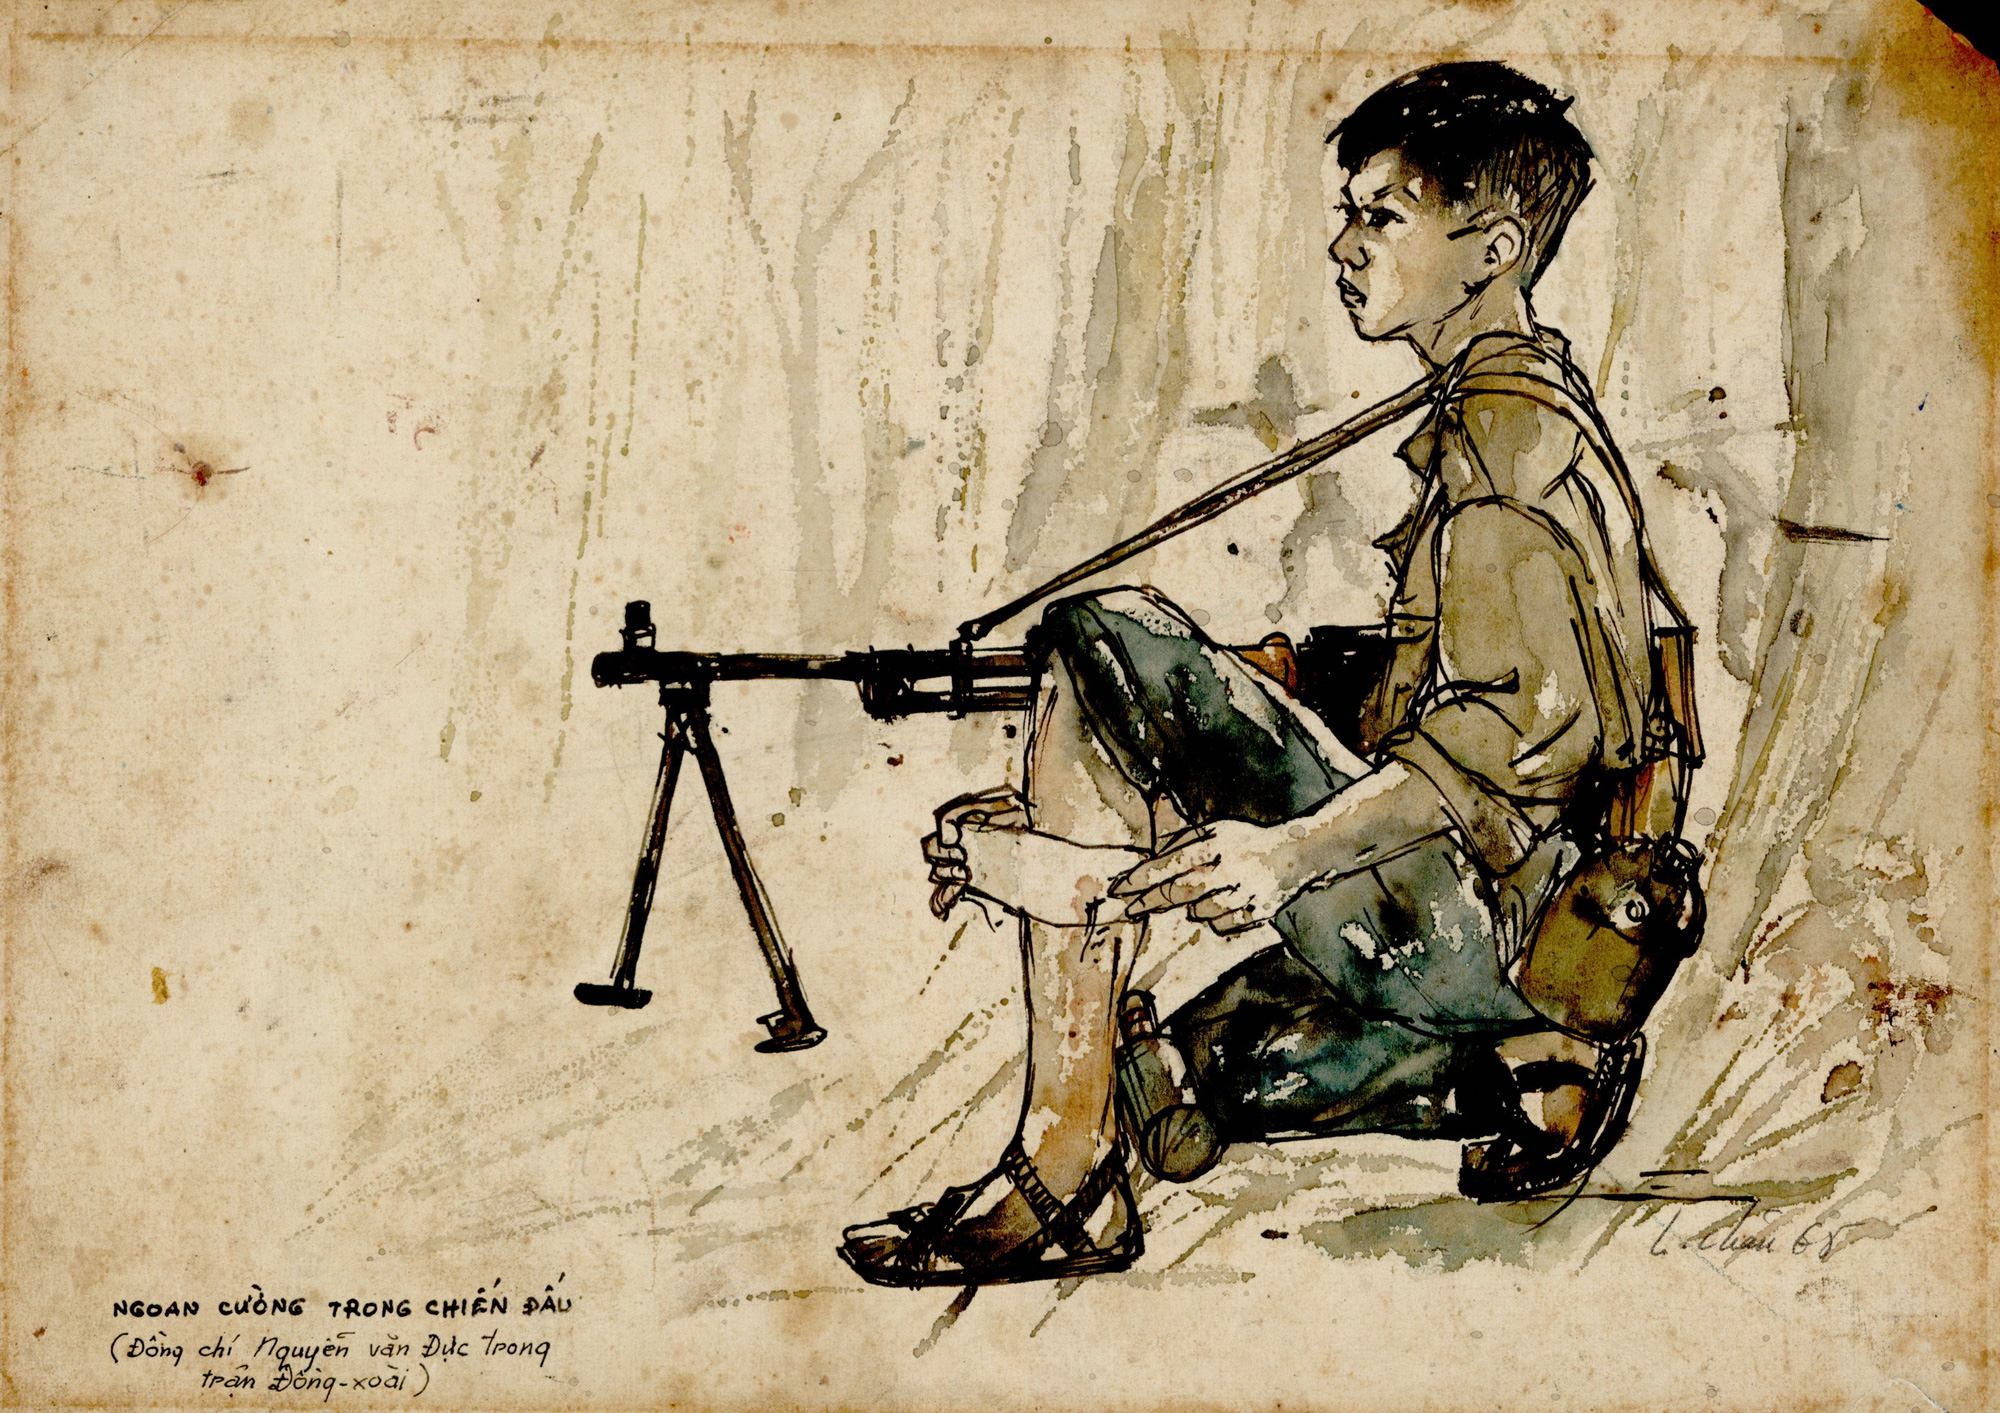 70 sketches depicting realistically and emotionally about the southern resistance war - Photo 3.